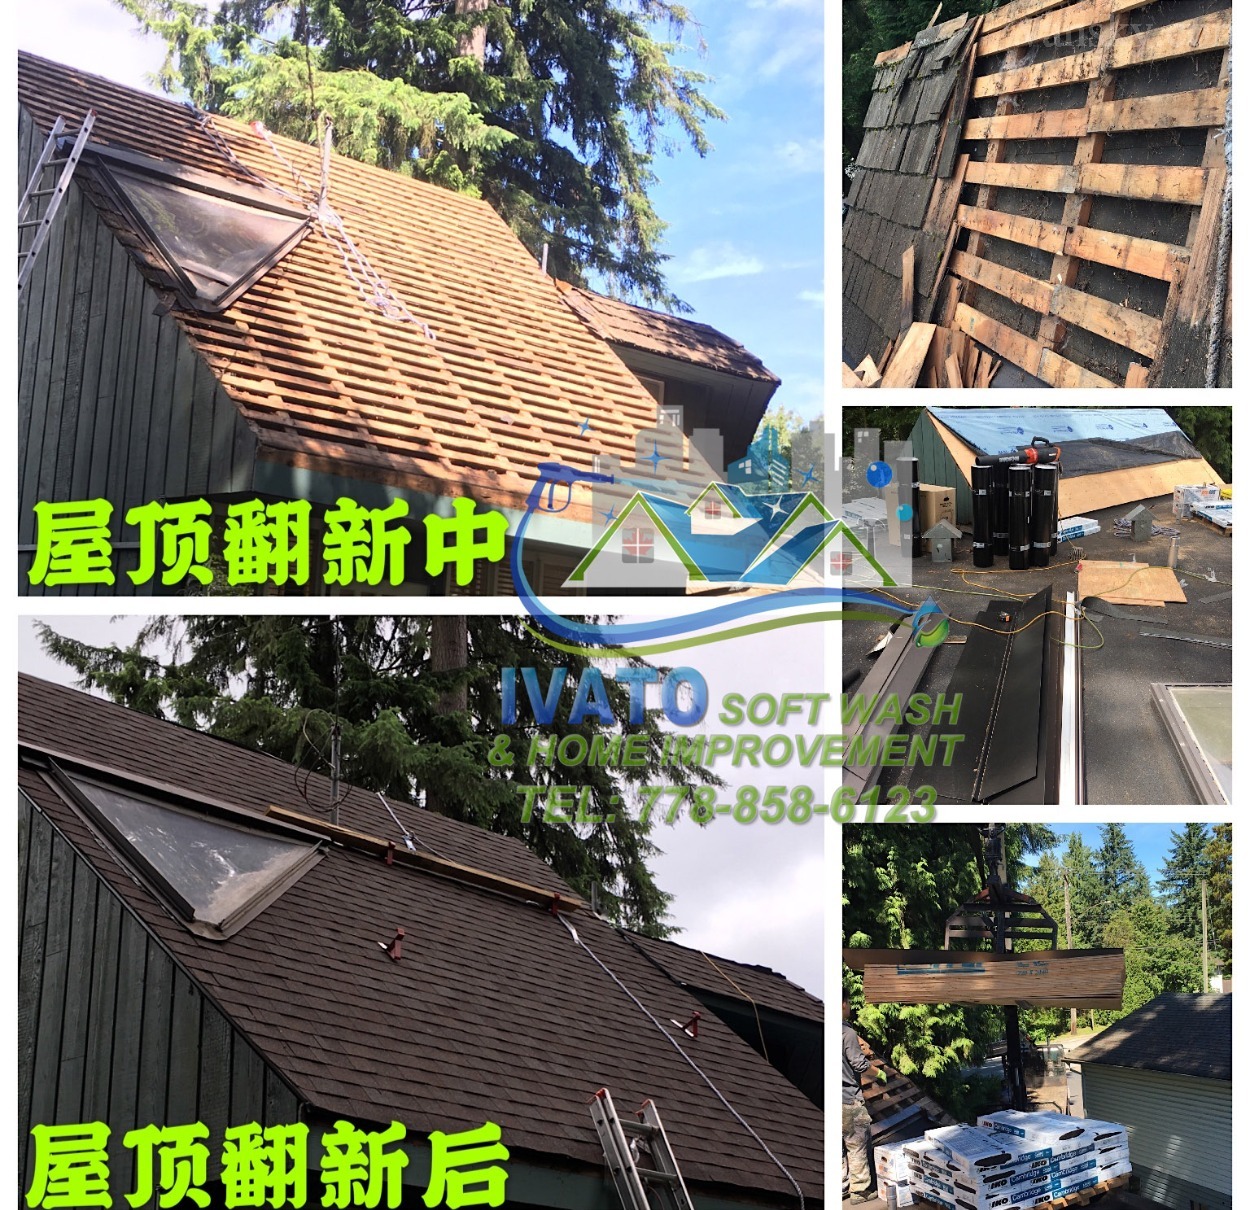 220328173940_07 Roof replace 02.jpg